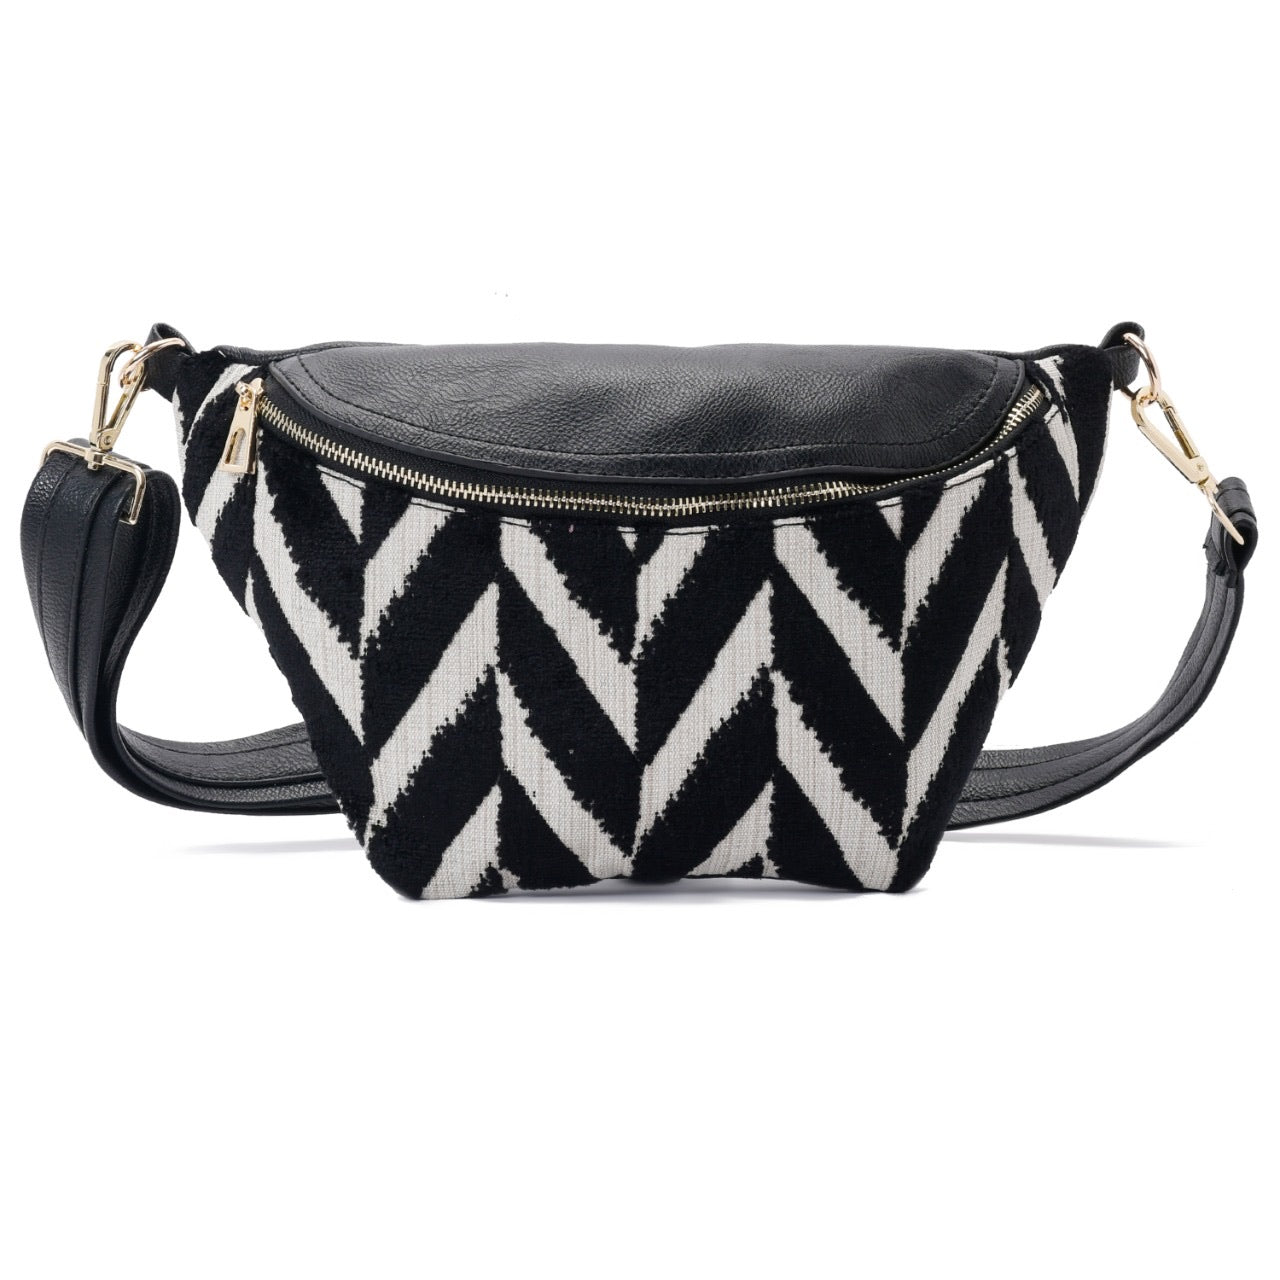 Fanny pack Black and White Color